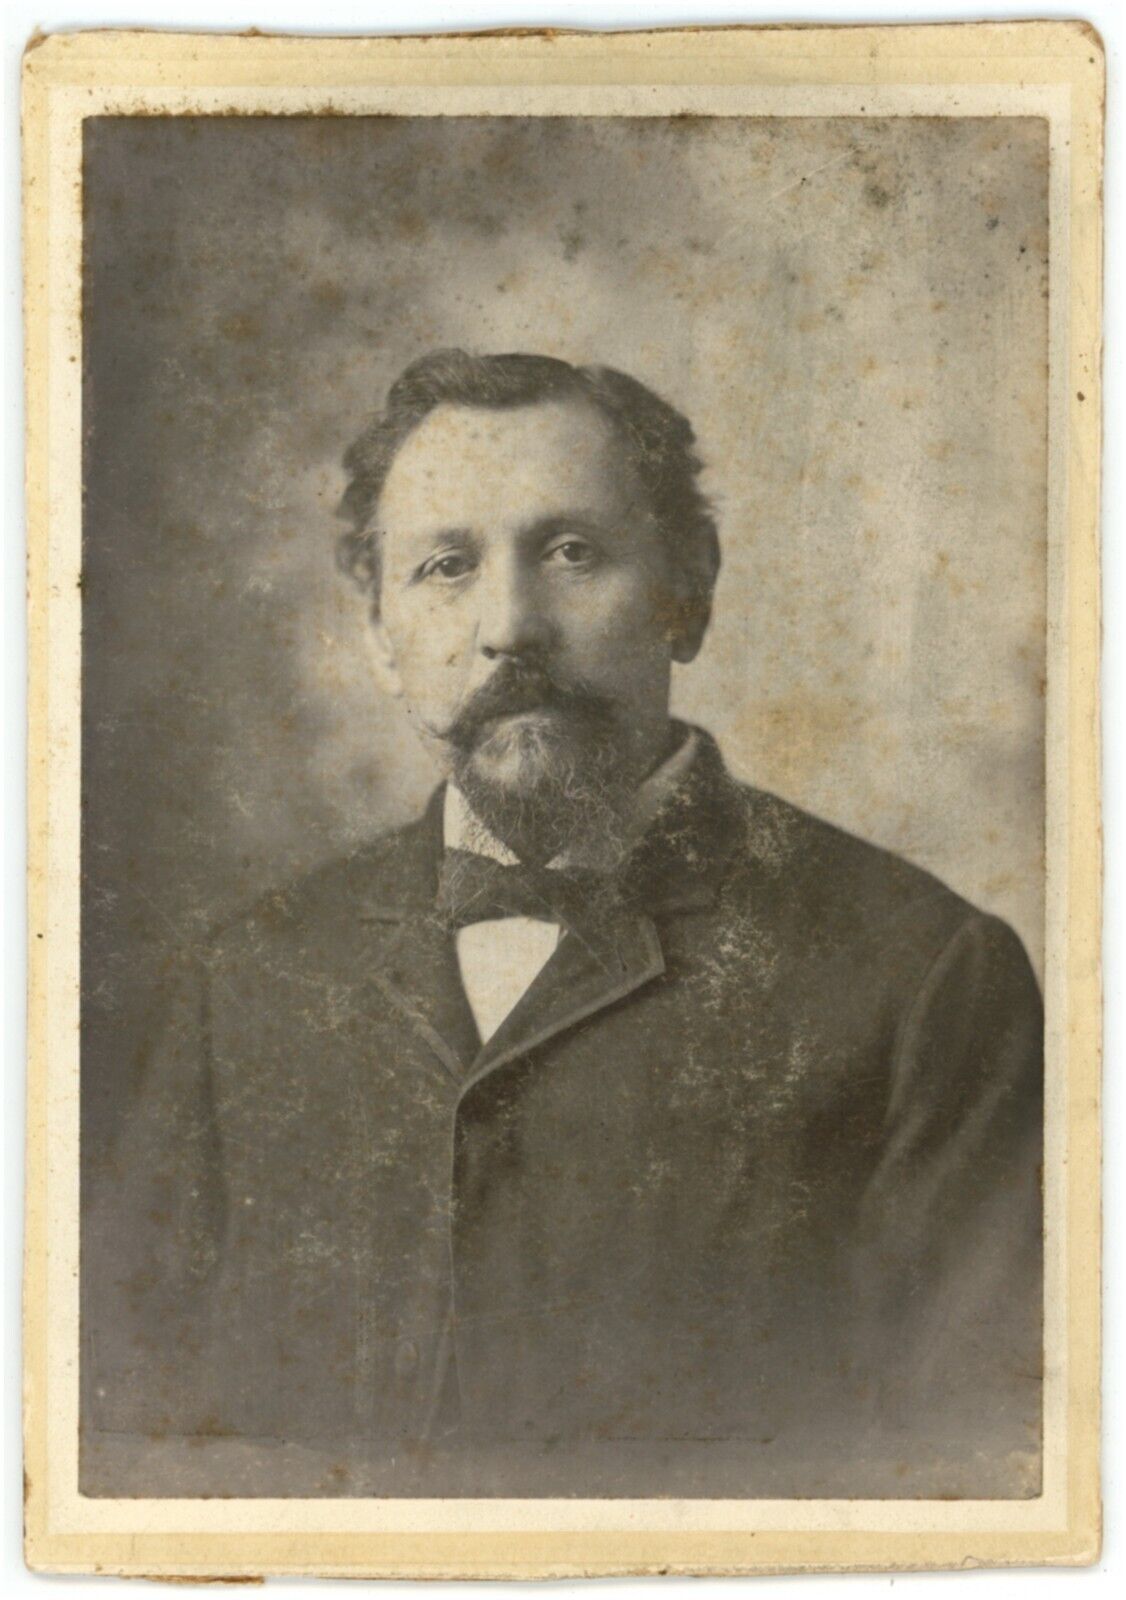 CIRCA 1880\'S CABINET CARD Featuring Handsome Older Man Goatee Beard Suit & Tie